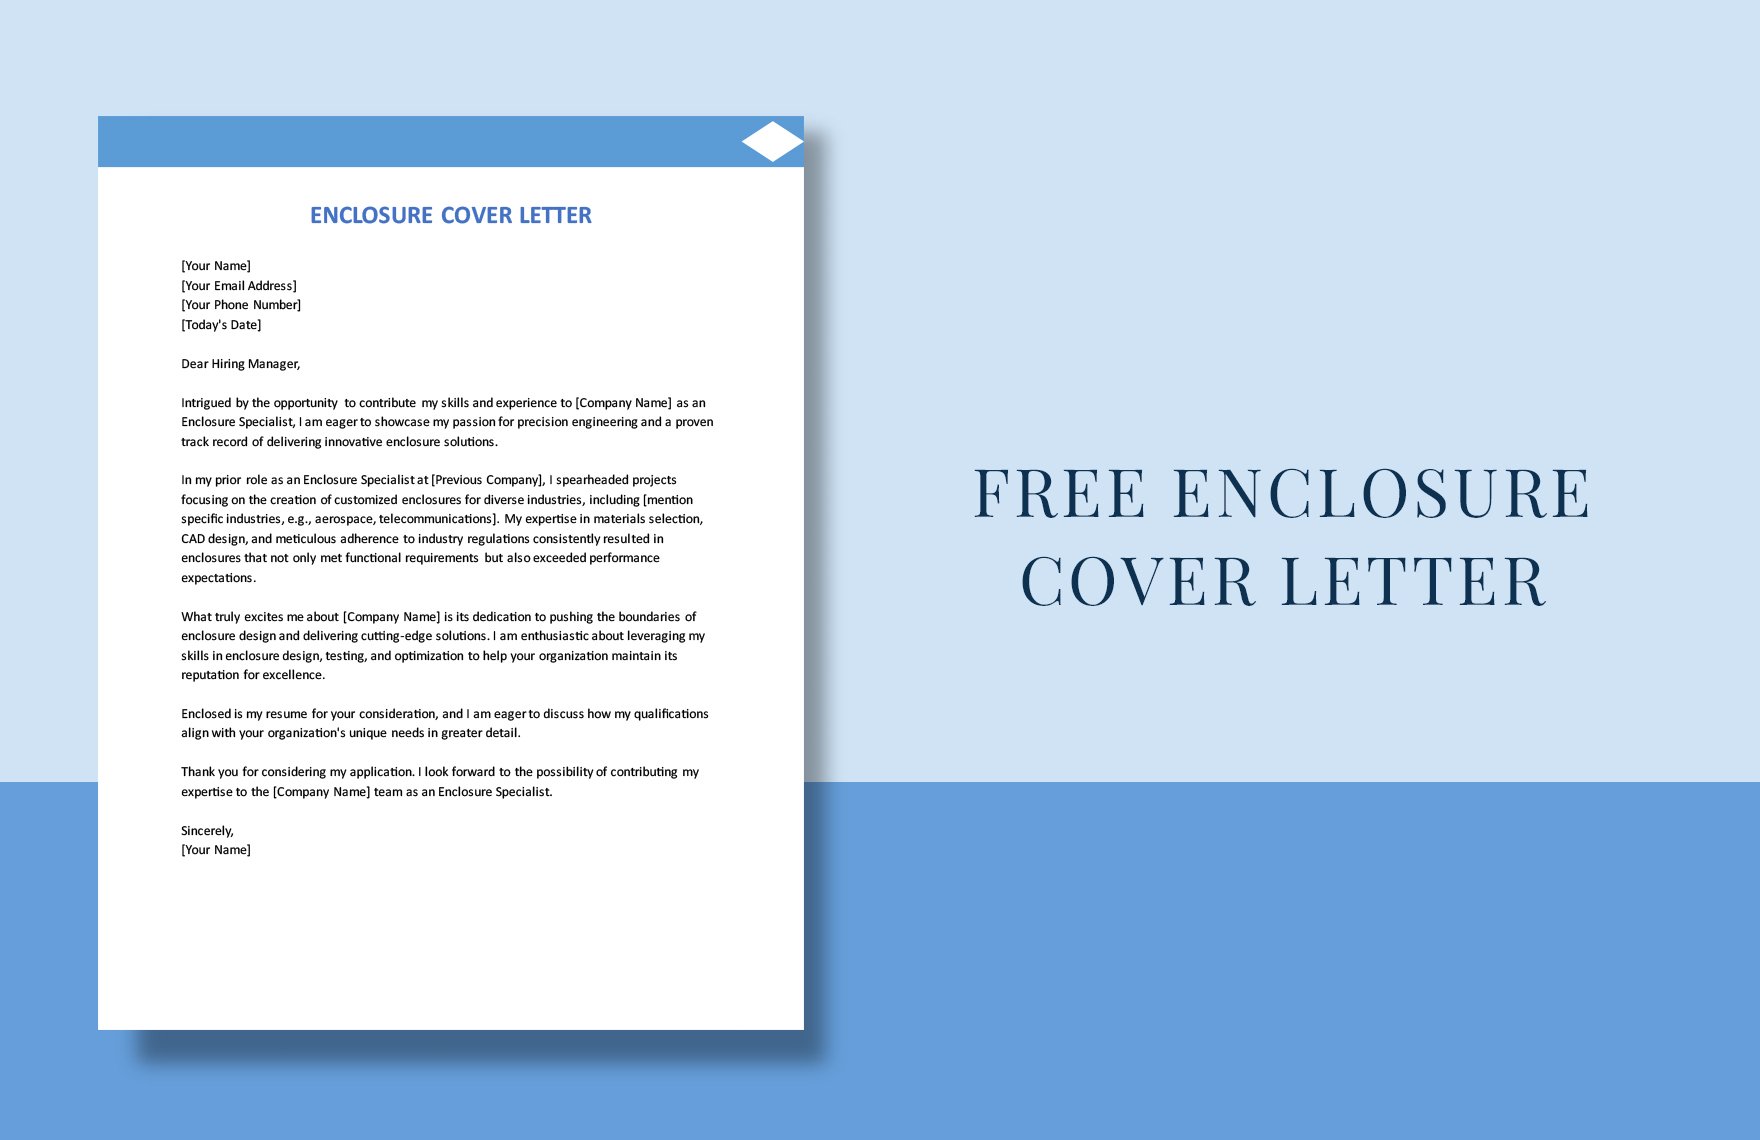 Enclosure Cover Letter in Word, Google Docs, PDF